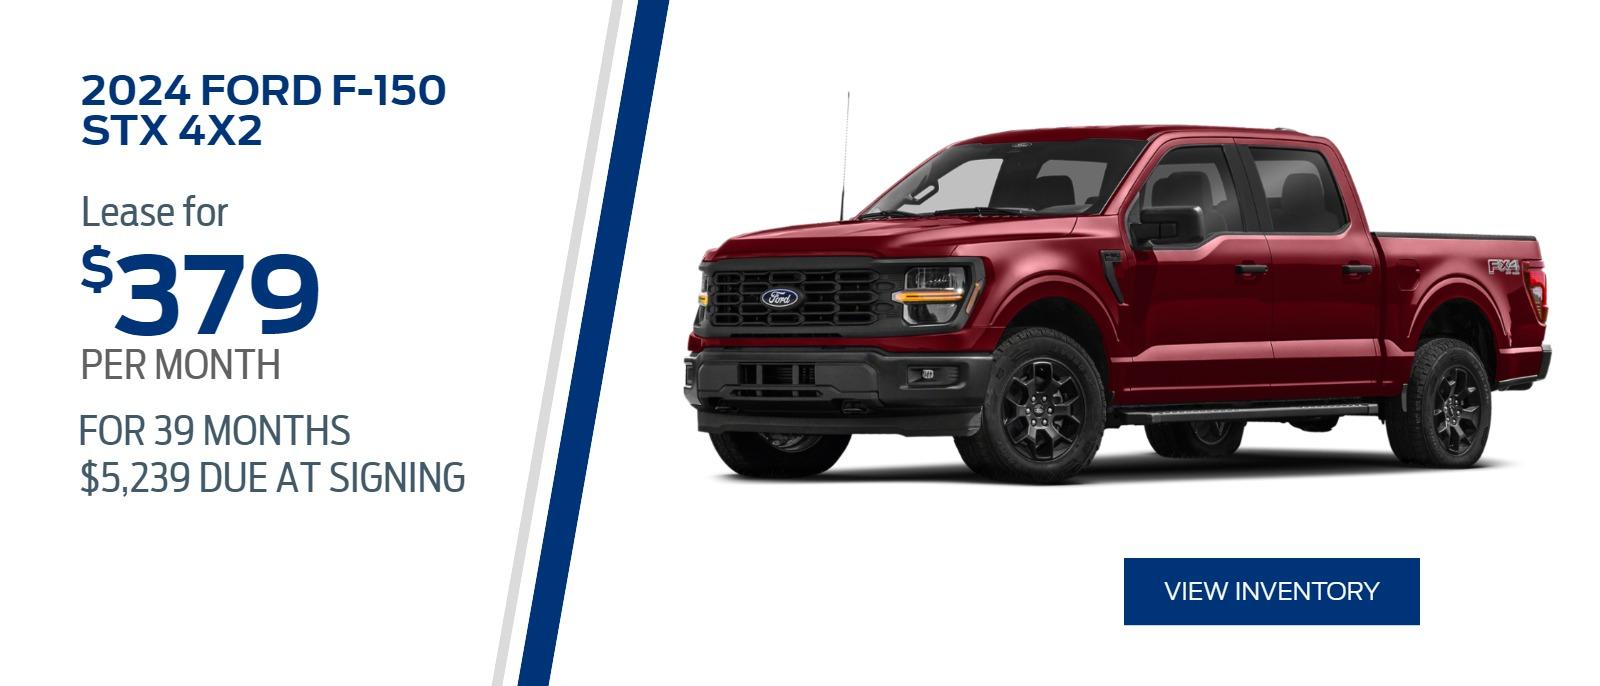 2024 Ford F-150 STX 4x2
379.00 Month Lease / 36 Months / 5239 due at signing